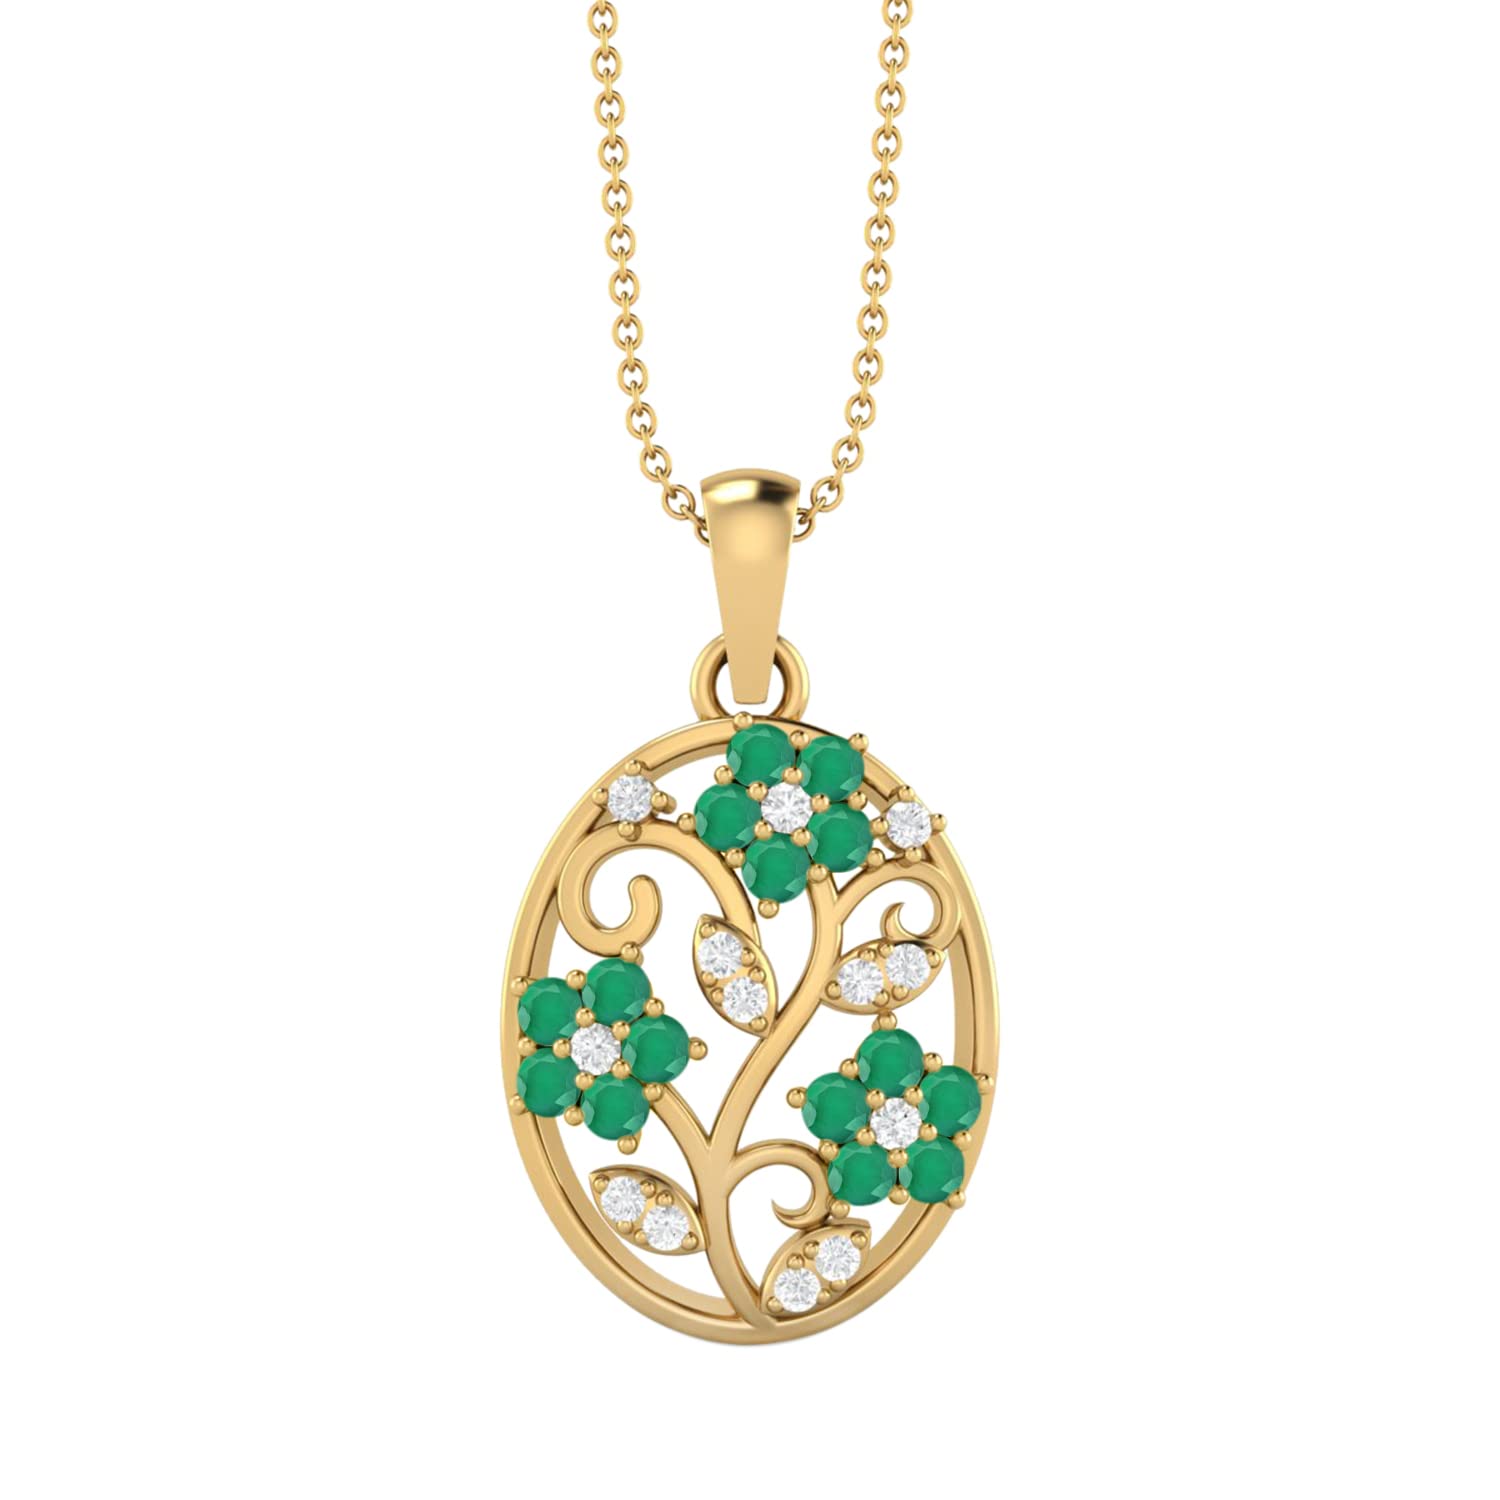 MOONEYE 925 Sterling Silver Filigree Floral Natural Round Cut Emerald & White Topaz Teardrop Charm Pendant Chain Necklace